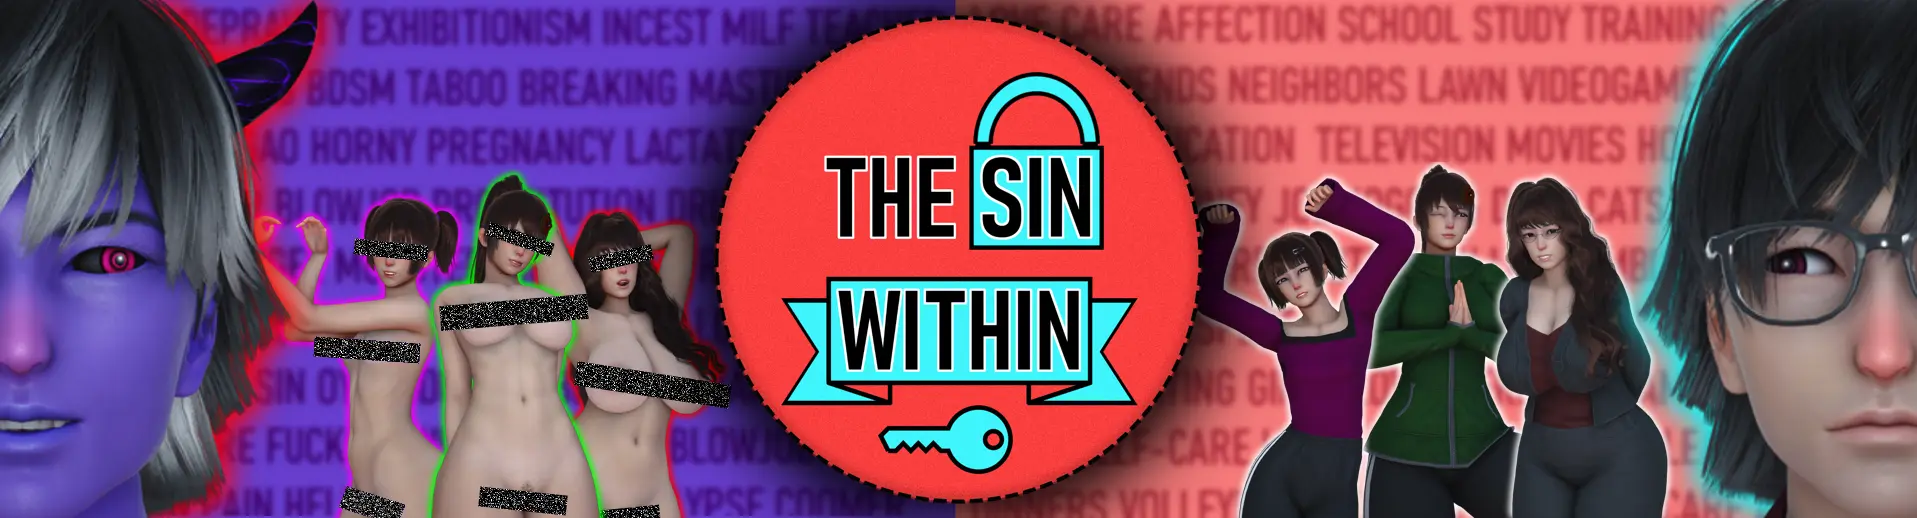 The Sin Within main image